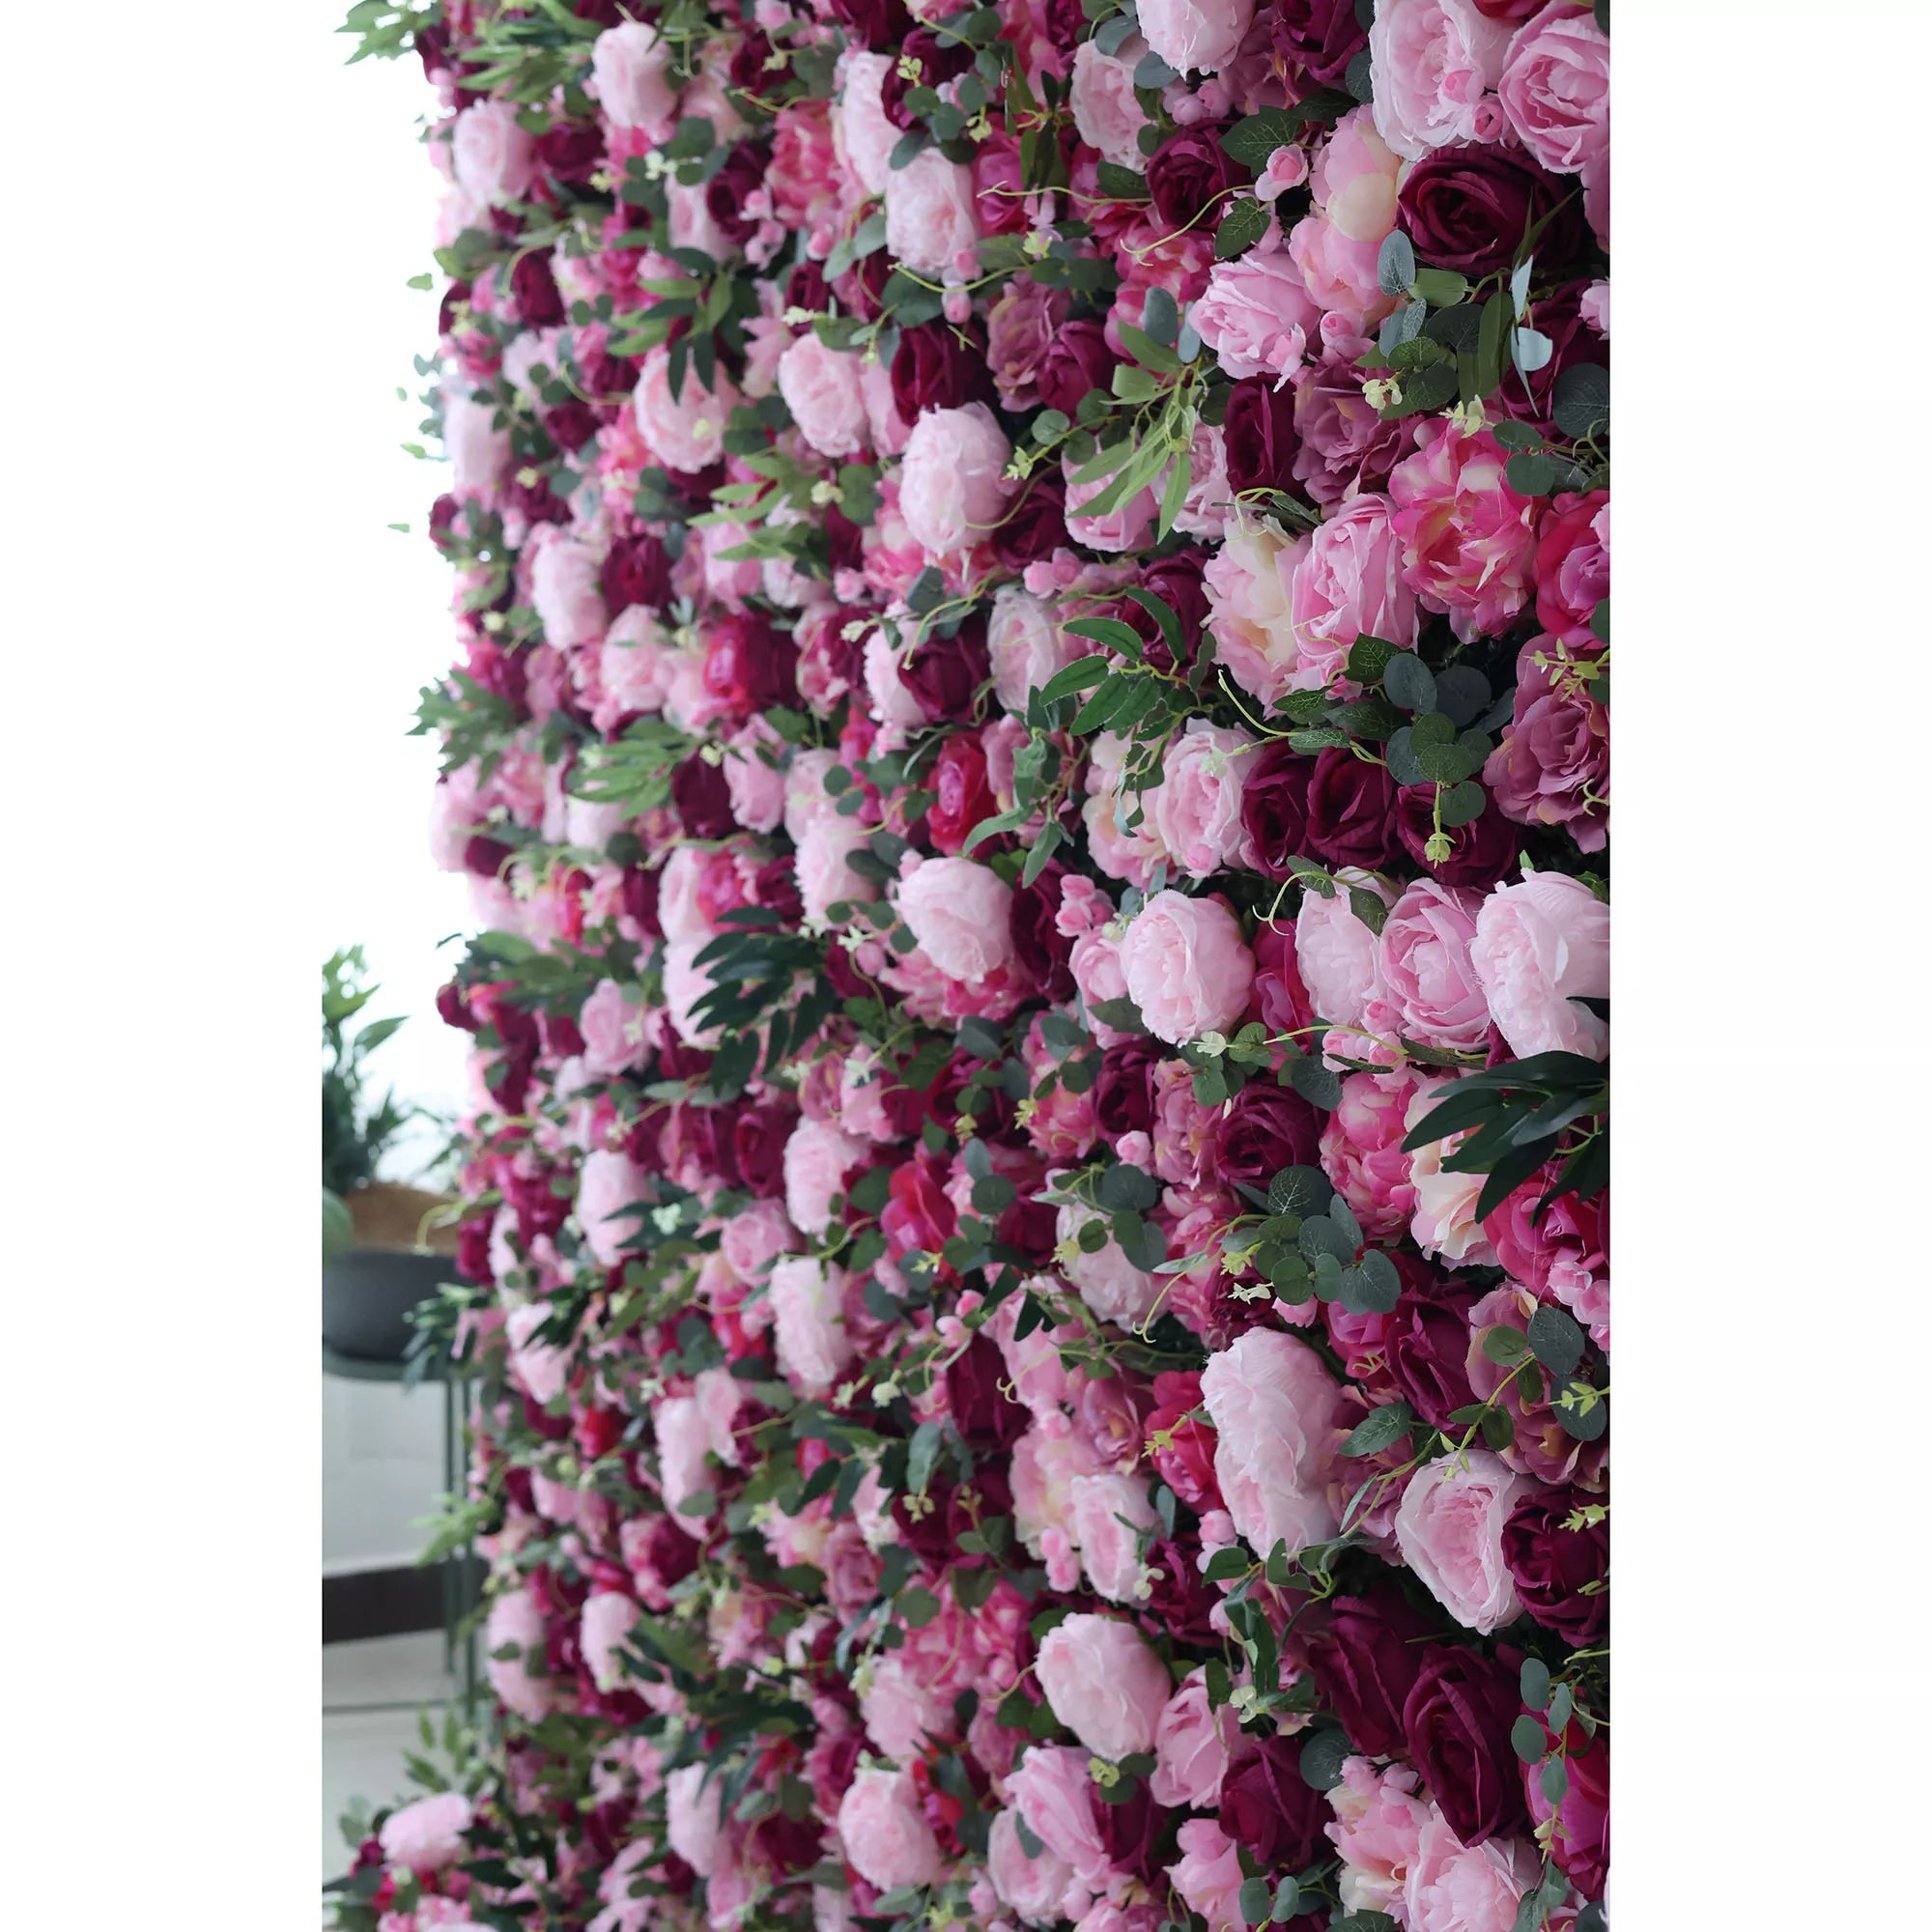 Valar Flowers Roll Up Fabric Artificial Mixed Wine Berry and Wisteria Purple Bouquet Flower Wall Wedding Backdrop, Floral Party Decor, Event Photography-VF-068